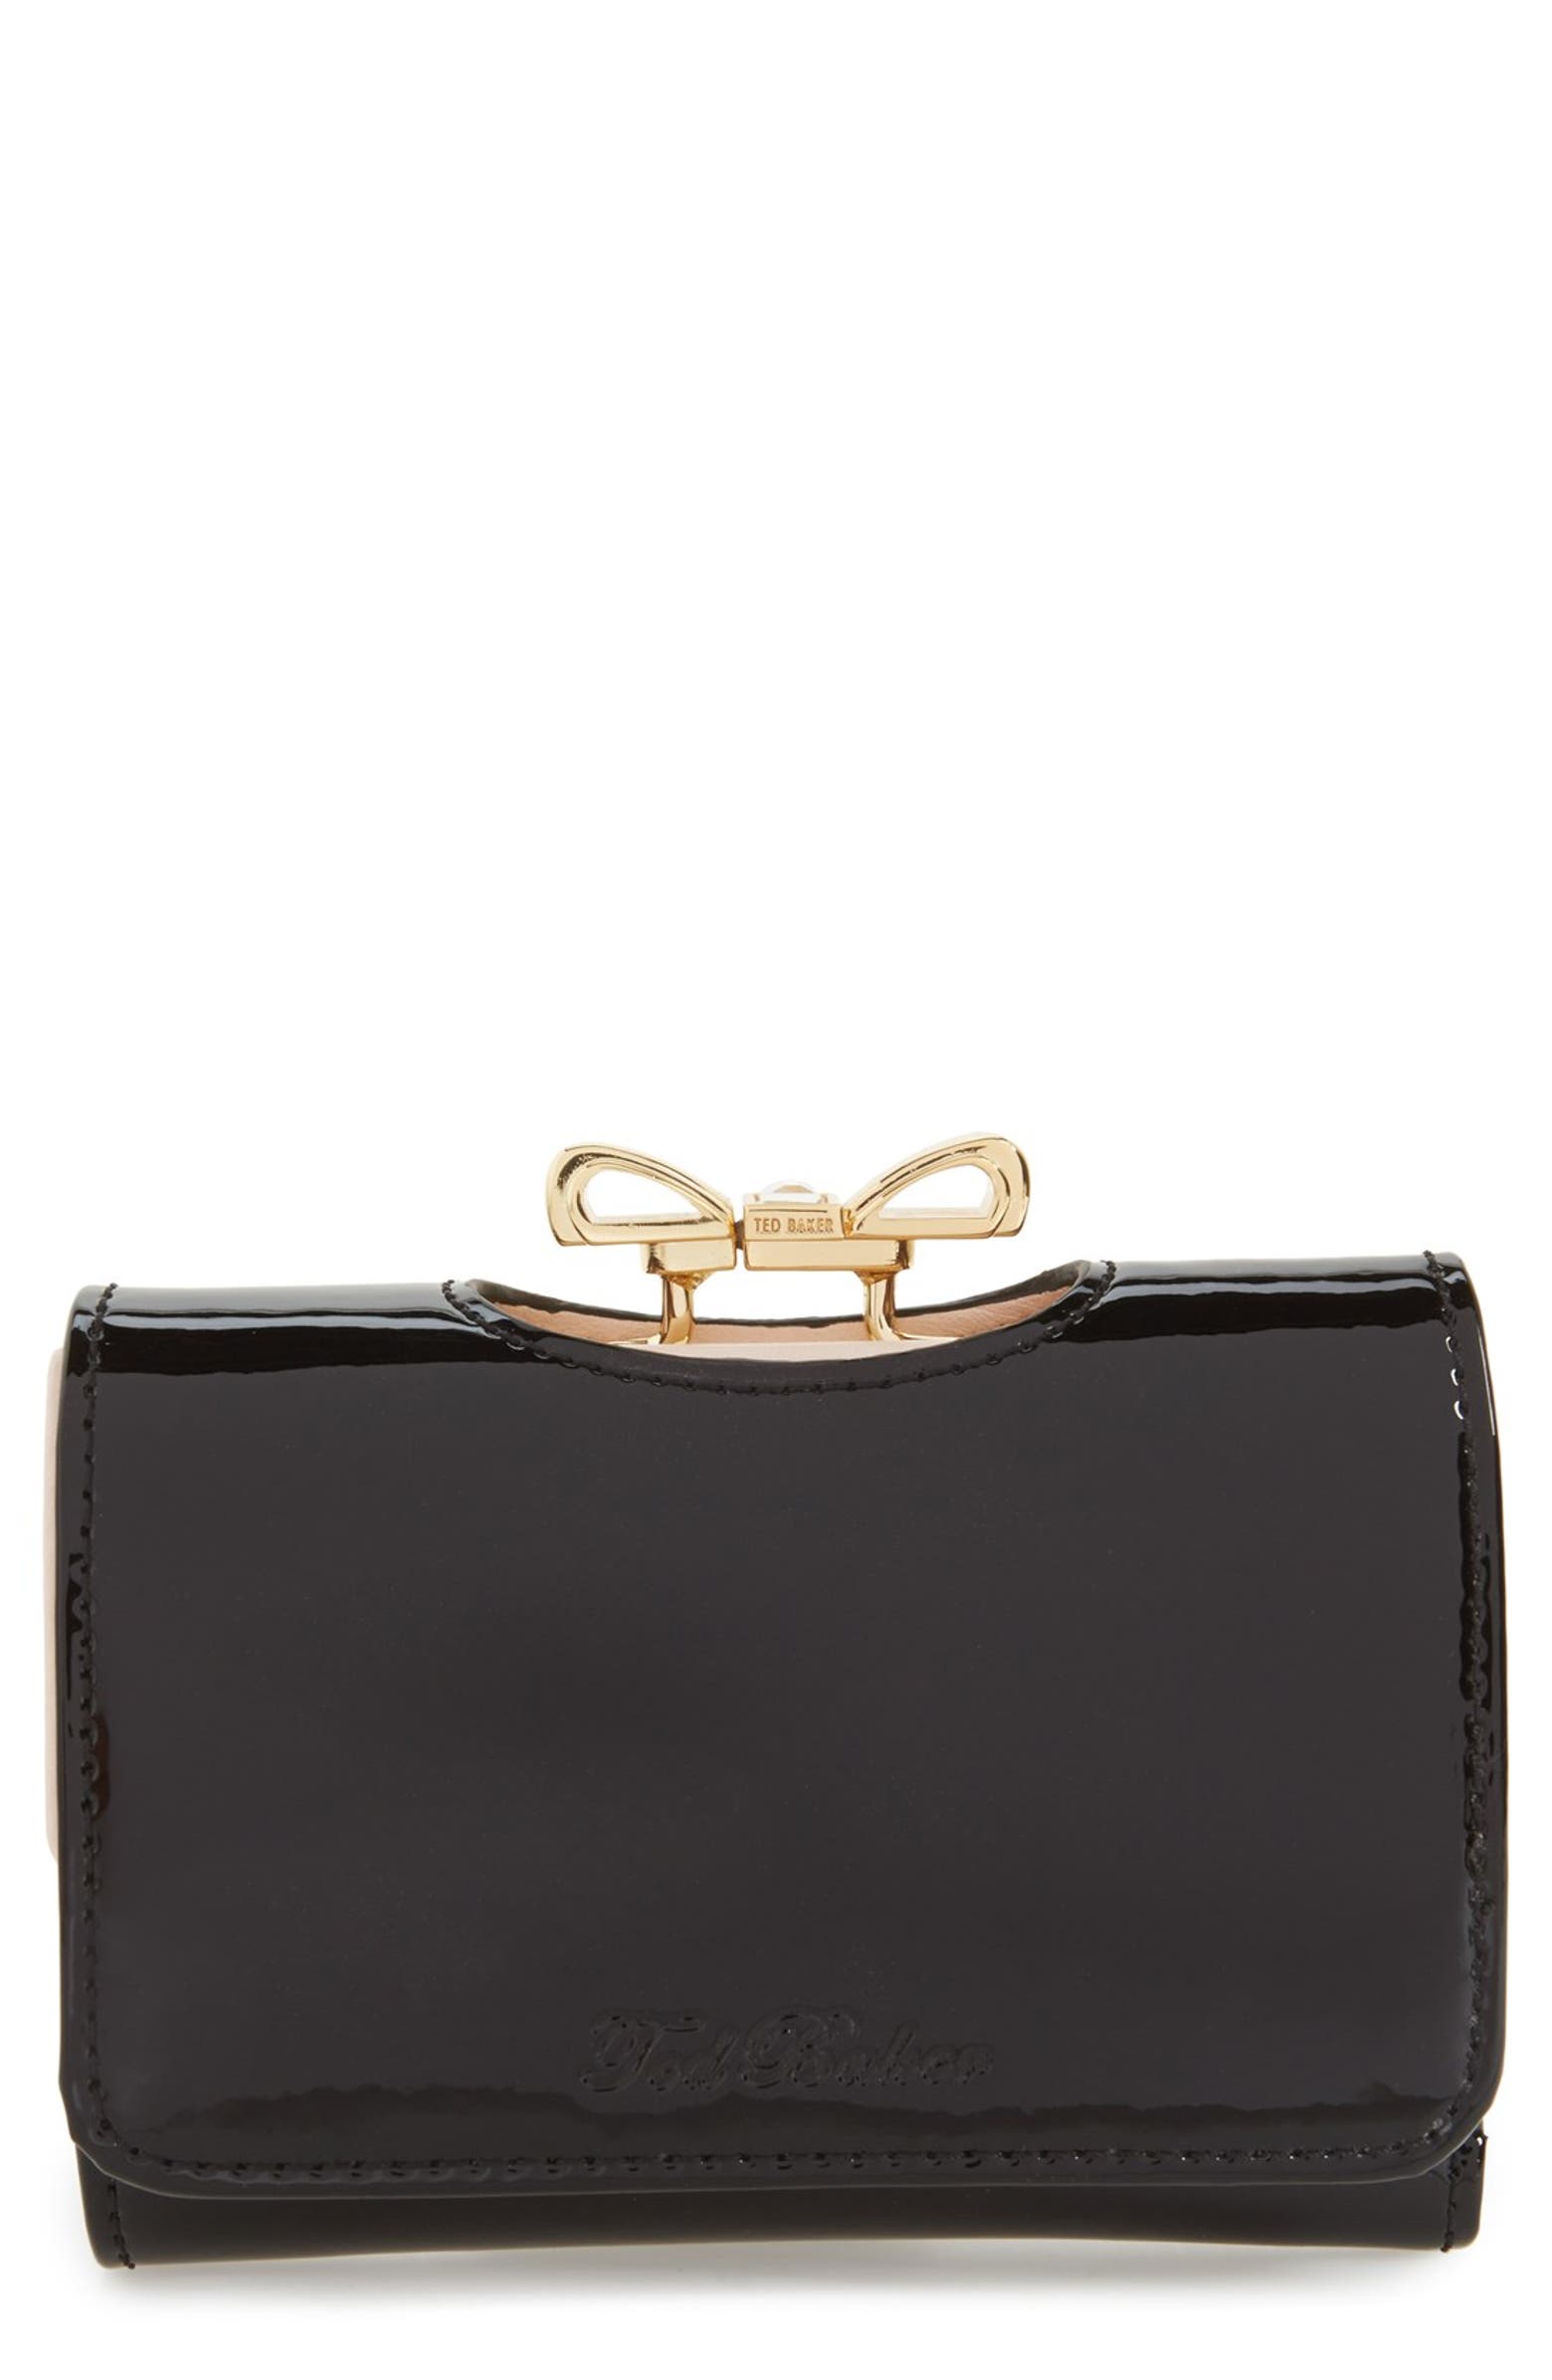 Ted Baker London 'Crystal Bow - Small' Patent Leather Clutch Wallet ...